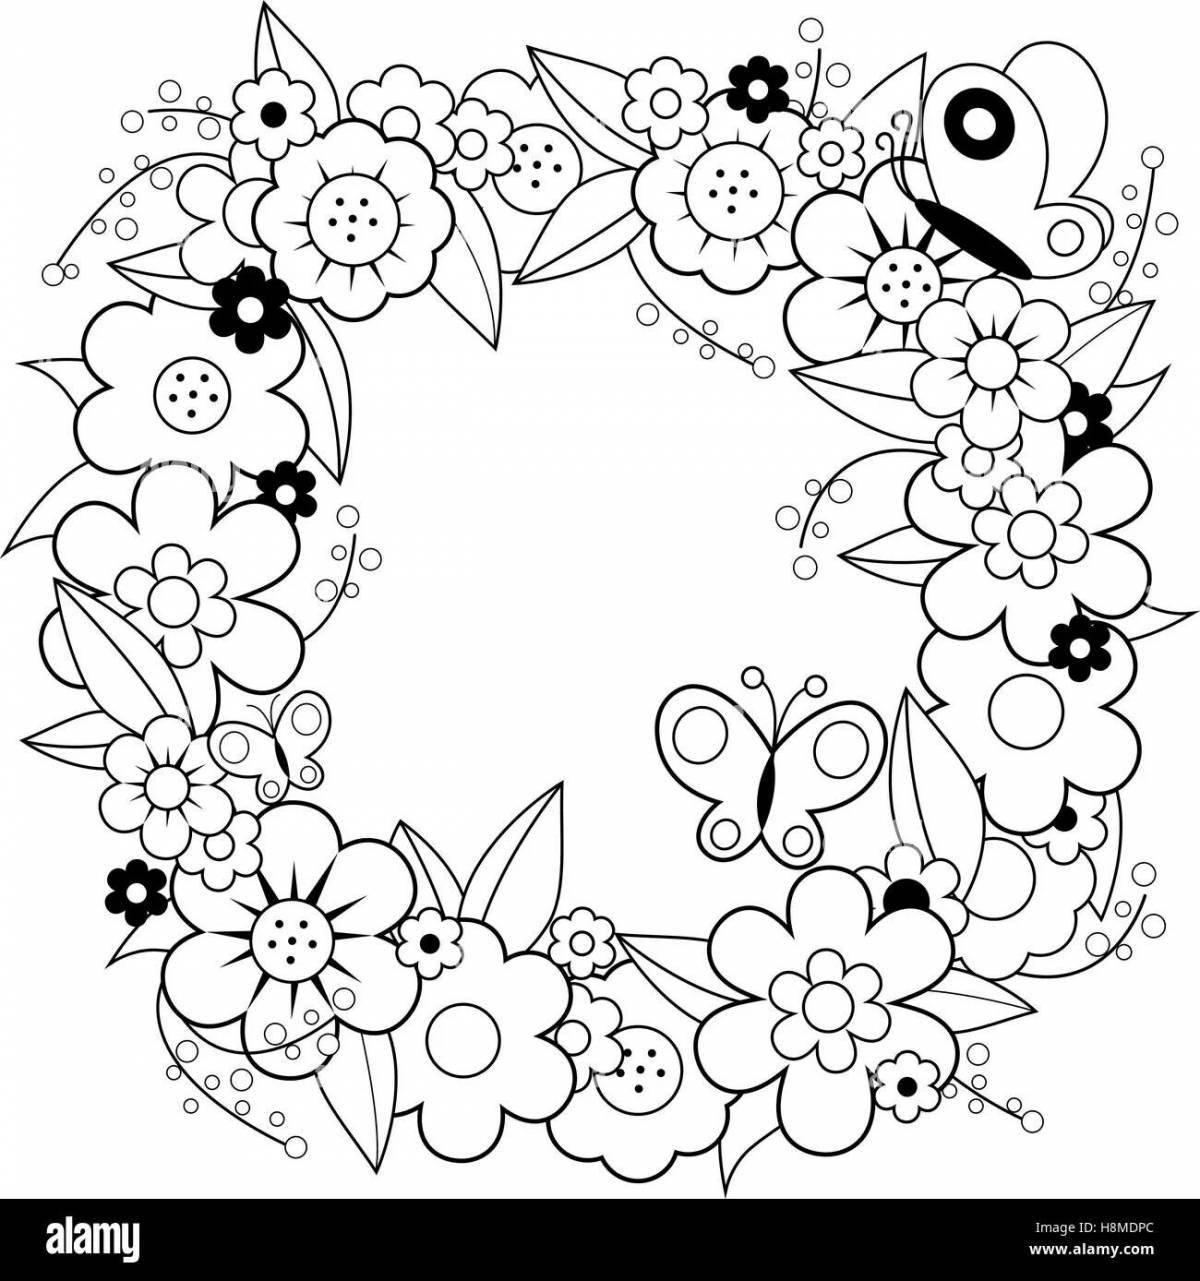 Coloring page blissful wreath of flowers